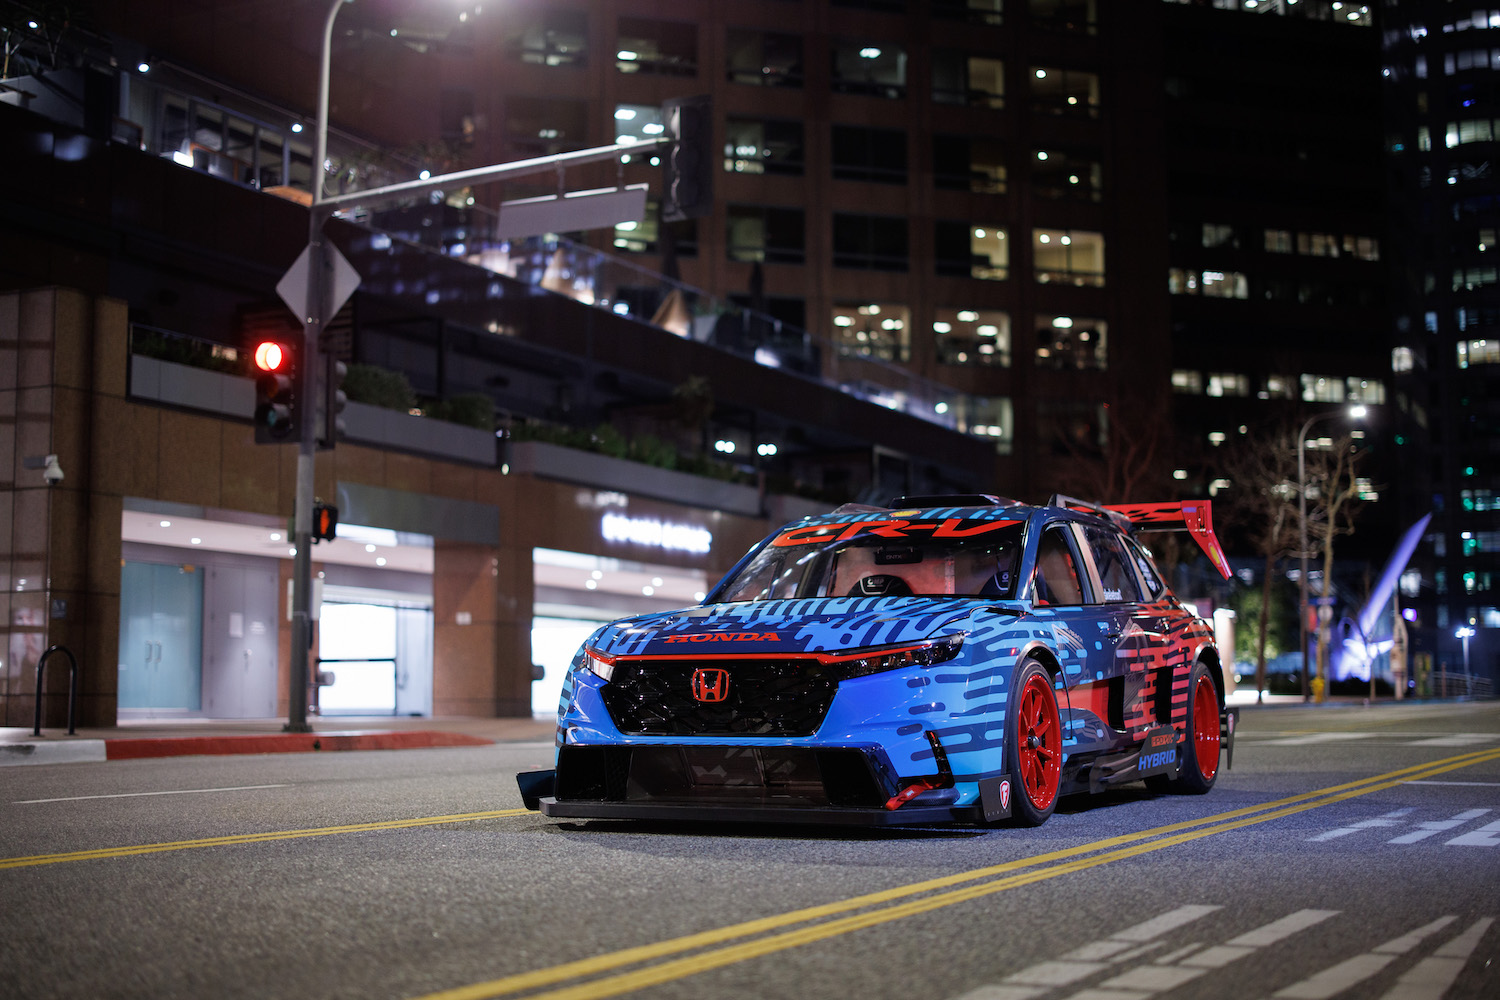 Front end angle of the Honda CR-V Hybrid Racer parked in the middle of the street at night in front of tall buildings.